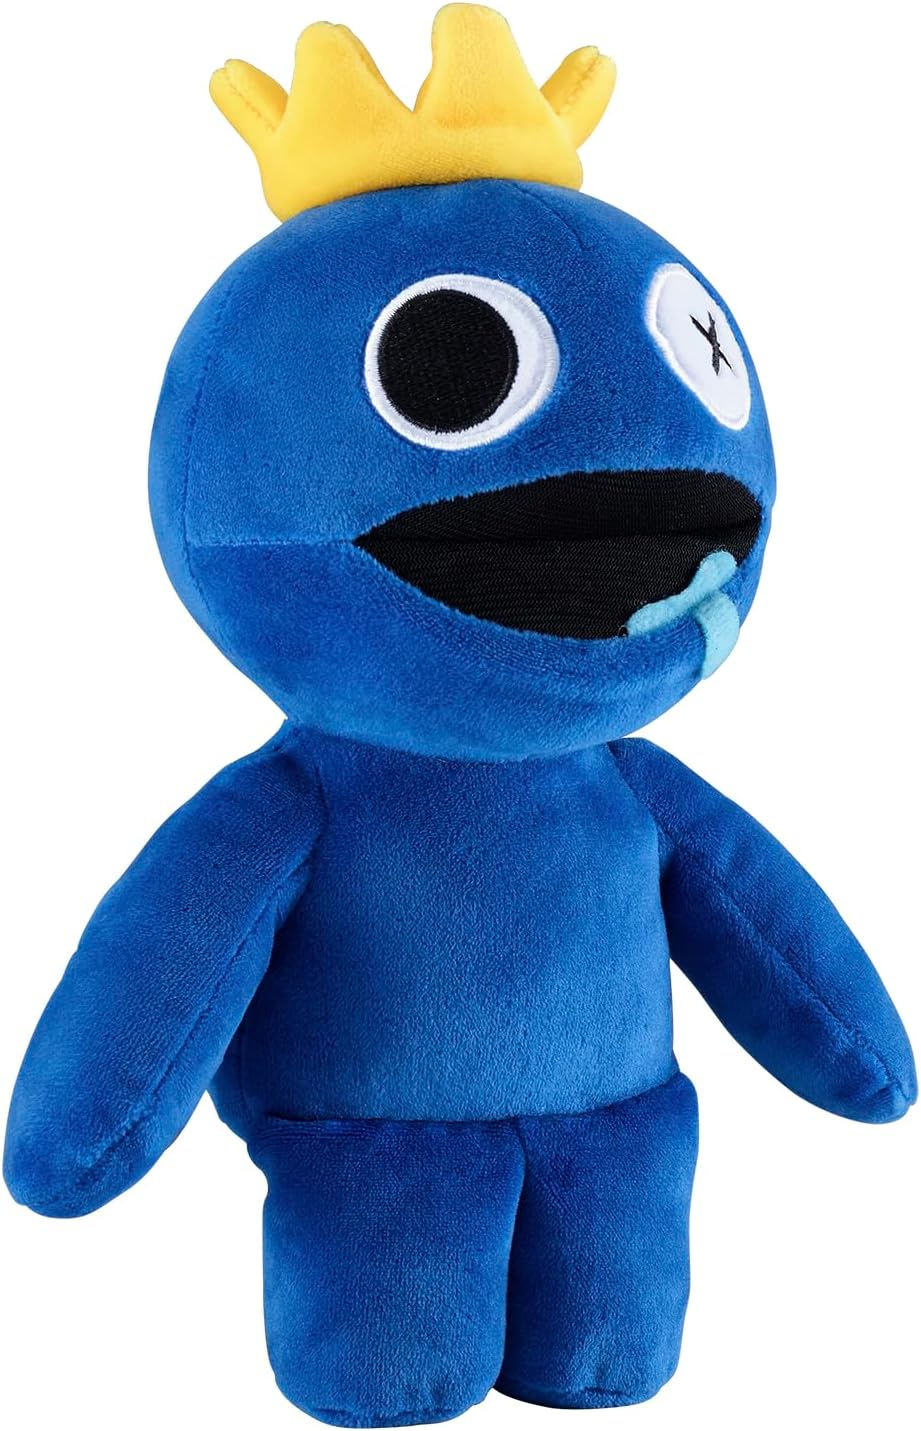 Rainbow Friends Series 1 - 8'' Collectible Roblox Blue Friend - Plush Toy